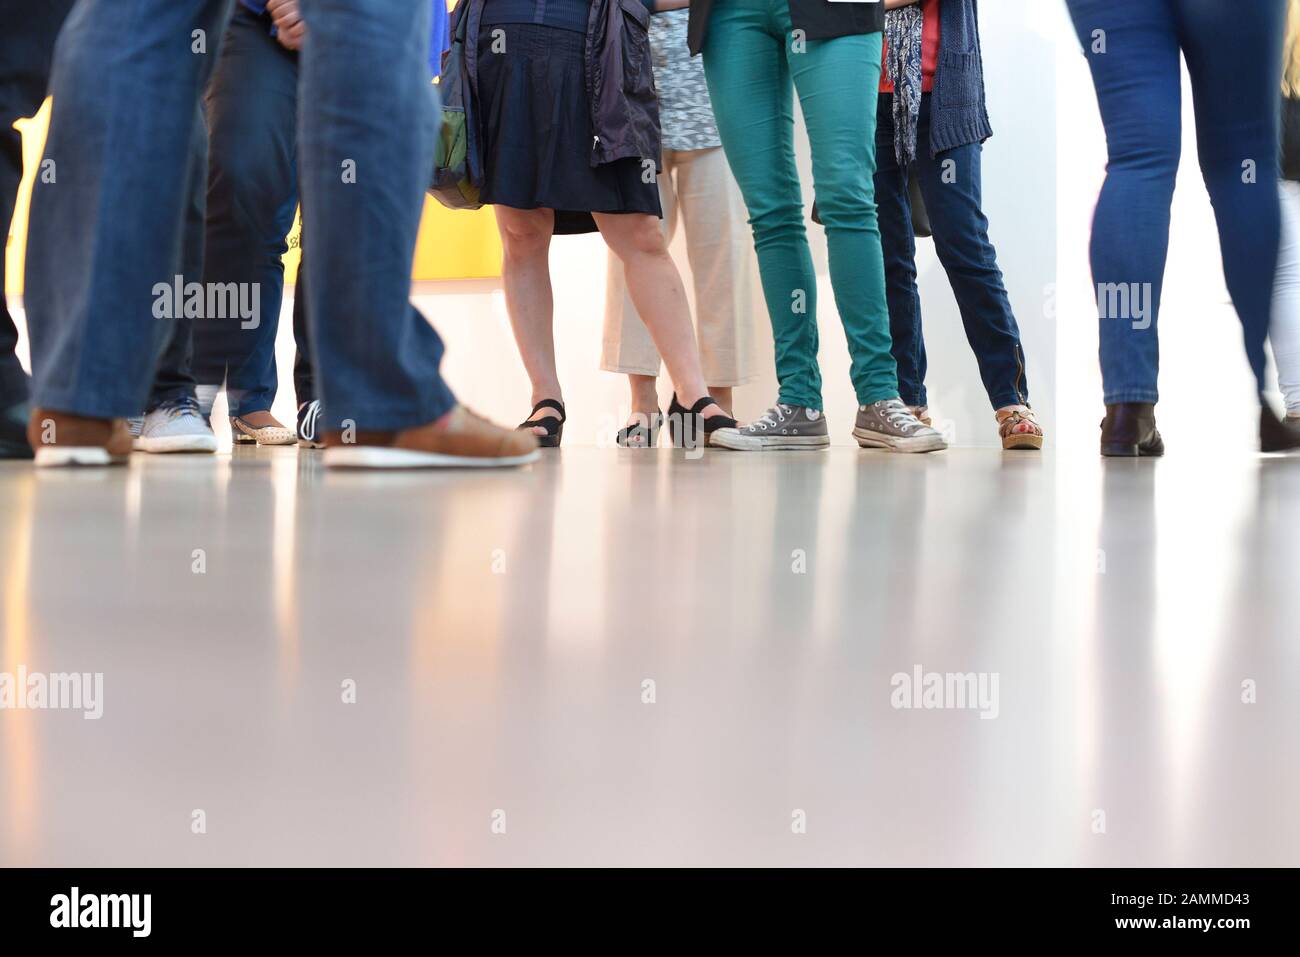 During a guided tour in Munich's Lenbachhaus, visitors stride across the museum's shiny floor. [automated translation] Stock Photo